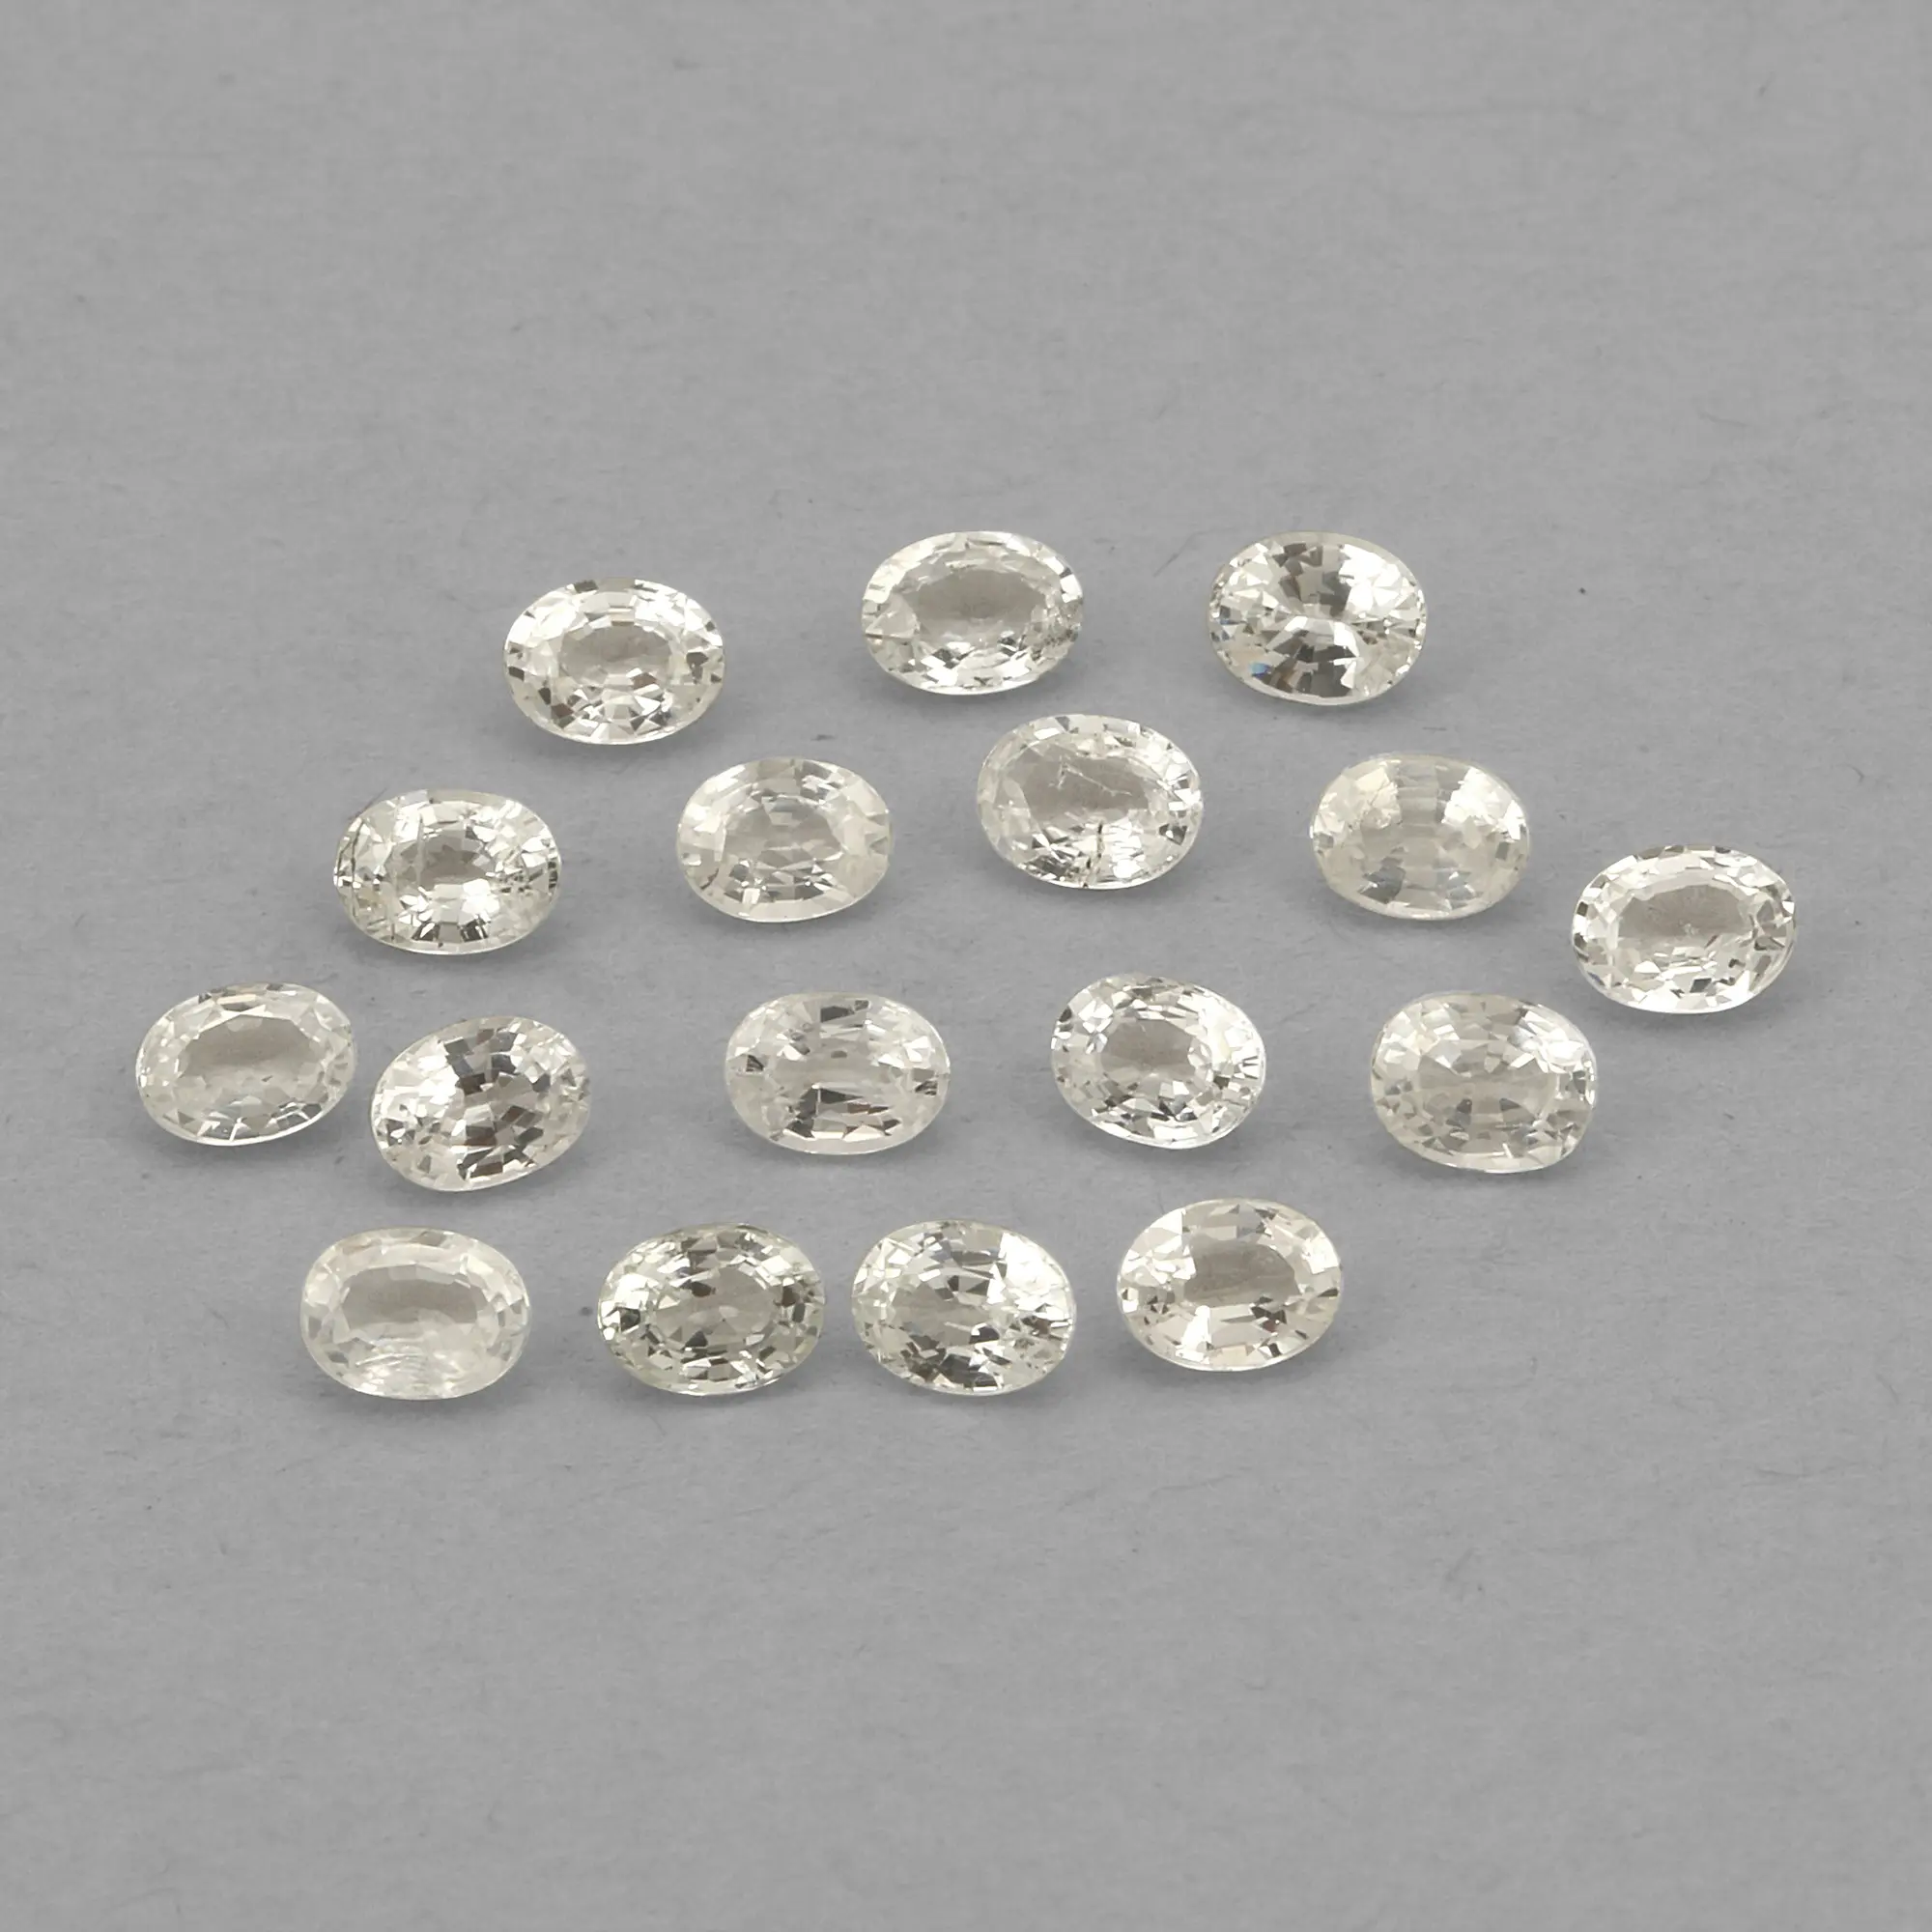 Oval 4x3mm Natural Ceylon White Sapphire Faceted Good Quality Factory Price White Gemstone for Making Jewelry Loose Gemstone